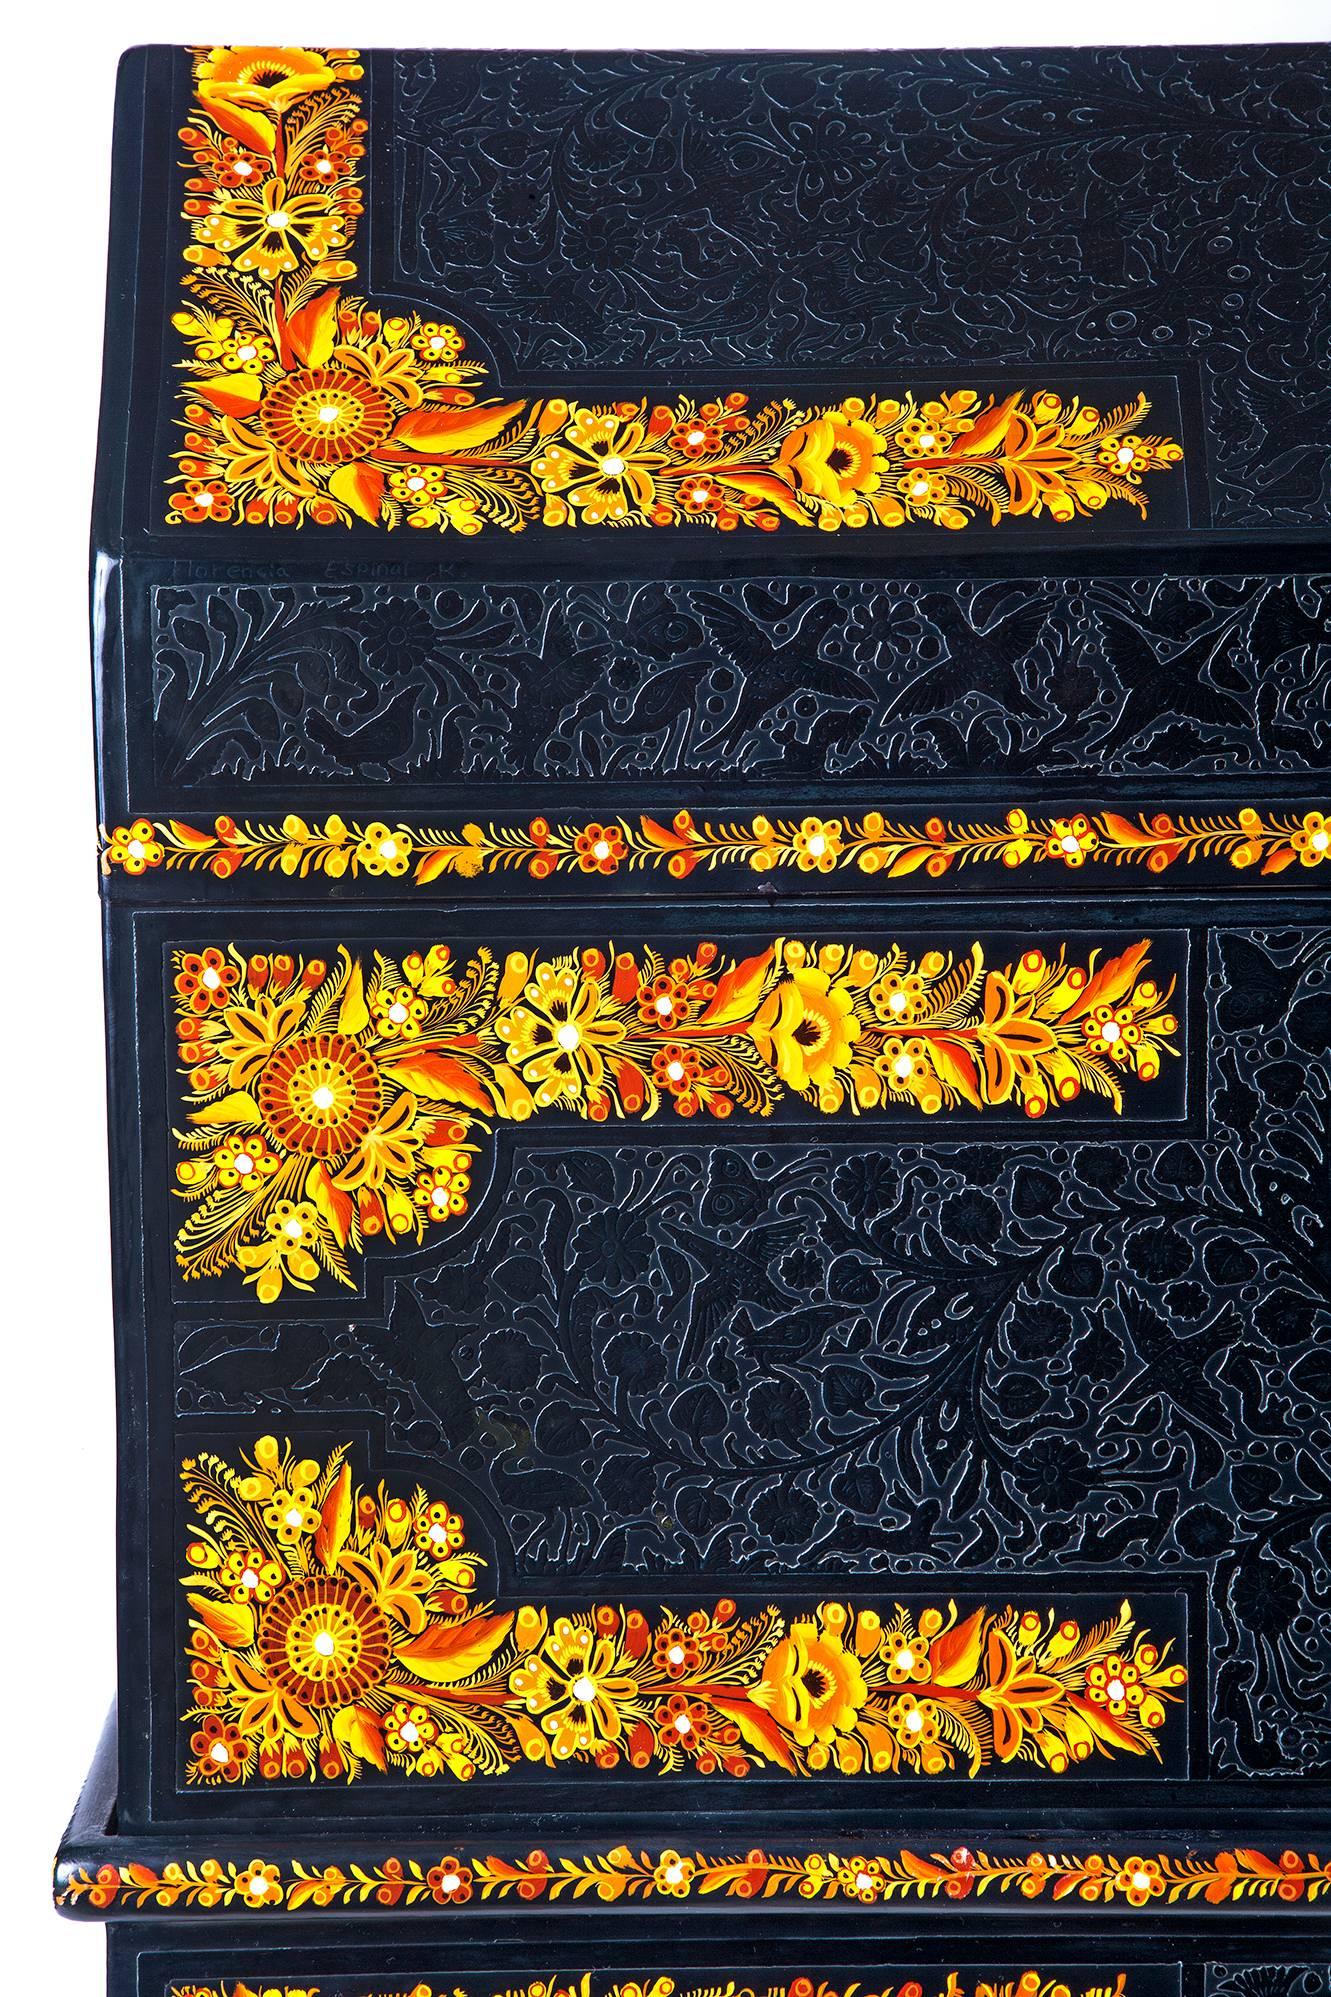  FREE SHIPPING TO WORLDWIDE!

Artisan: Florencia Espinal Ramirez
MASTERPIECE
Made of Linaloe wood decorated with lacquer, used two techniques: black scratchwork in the base and gold applied with paint brush.

- Dimensions: 32